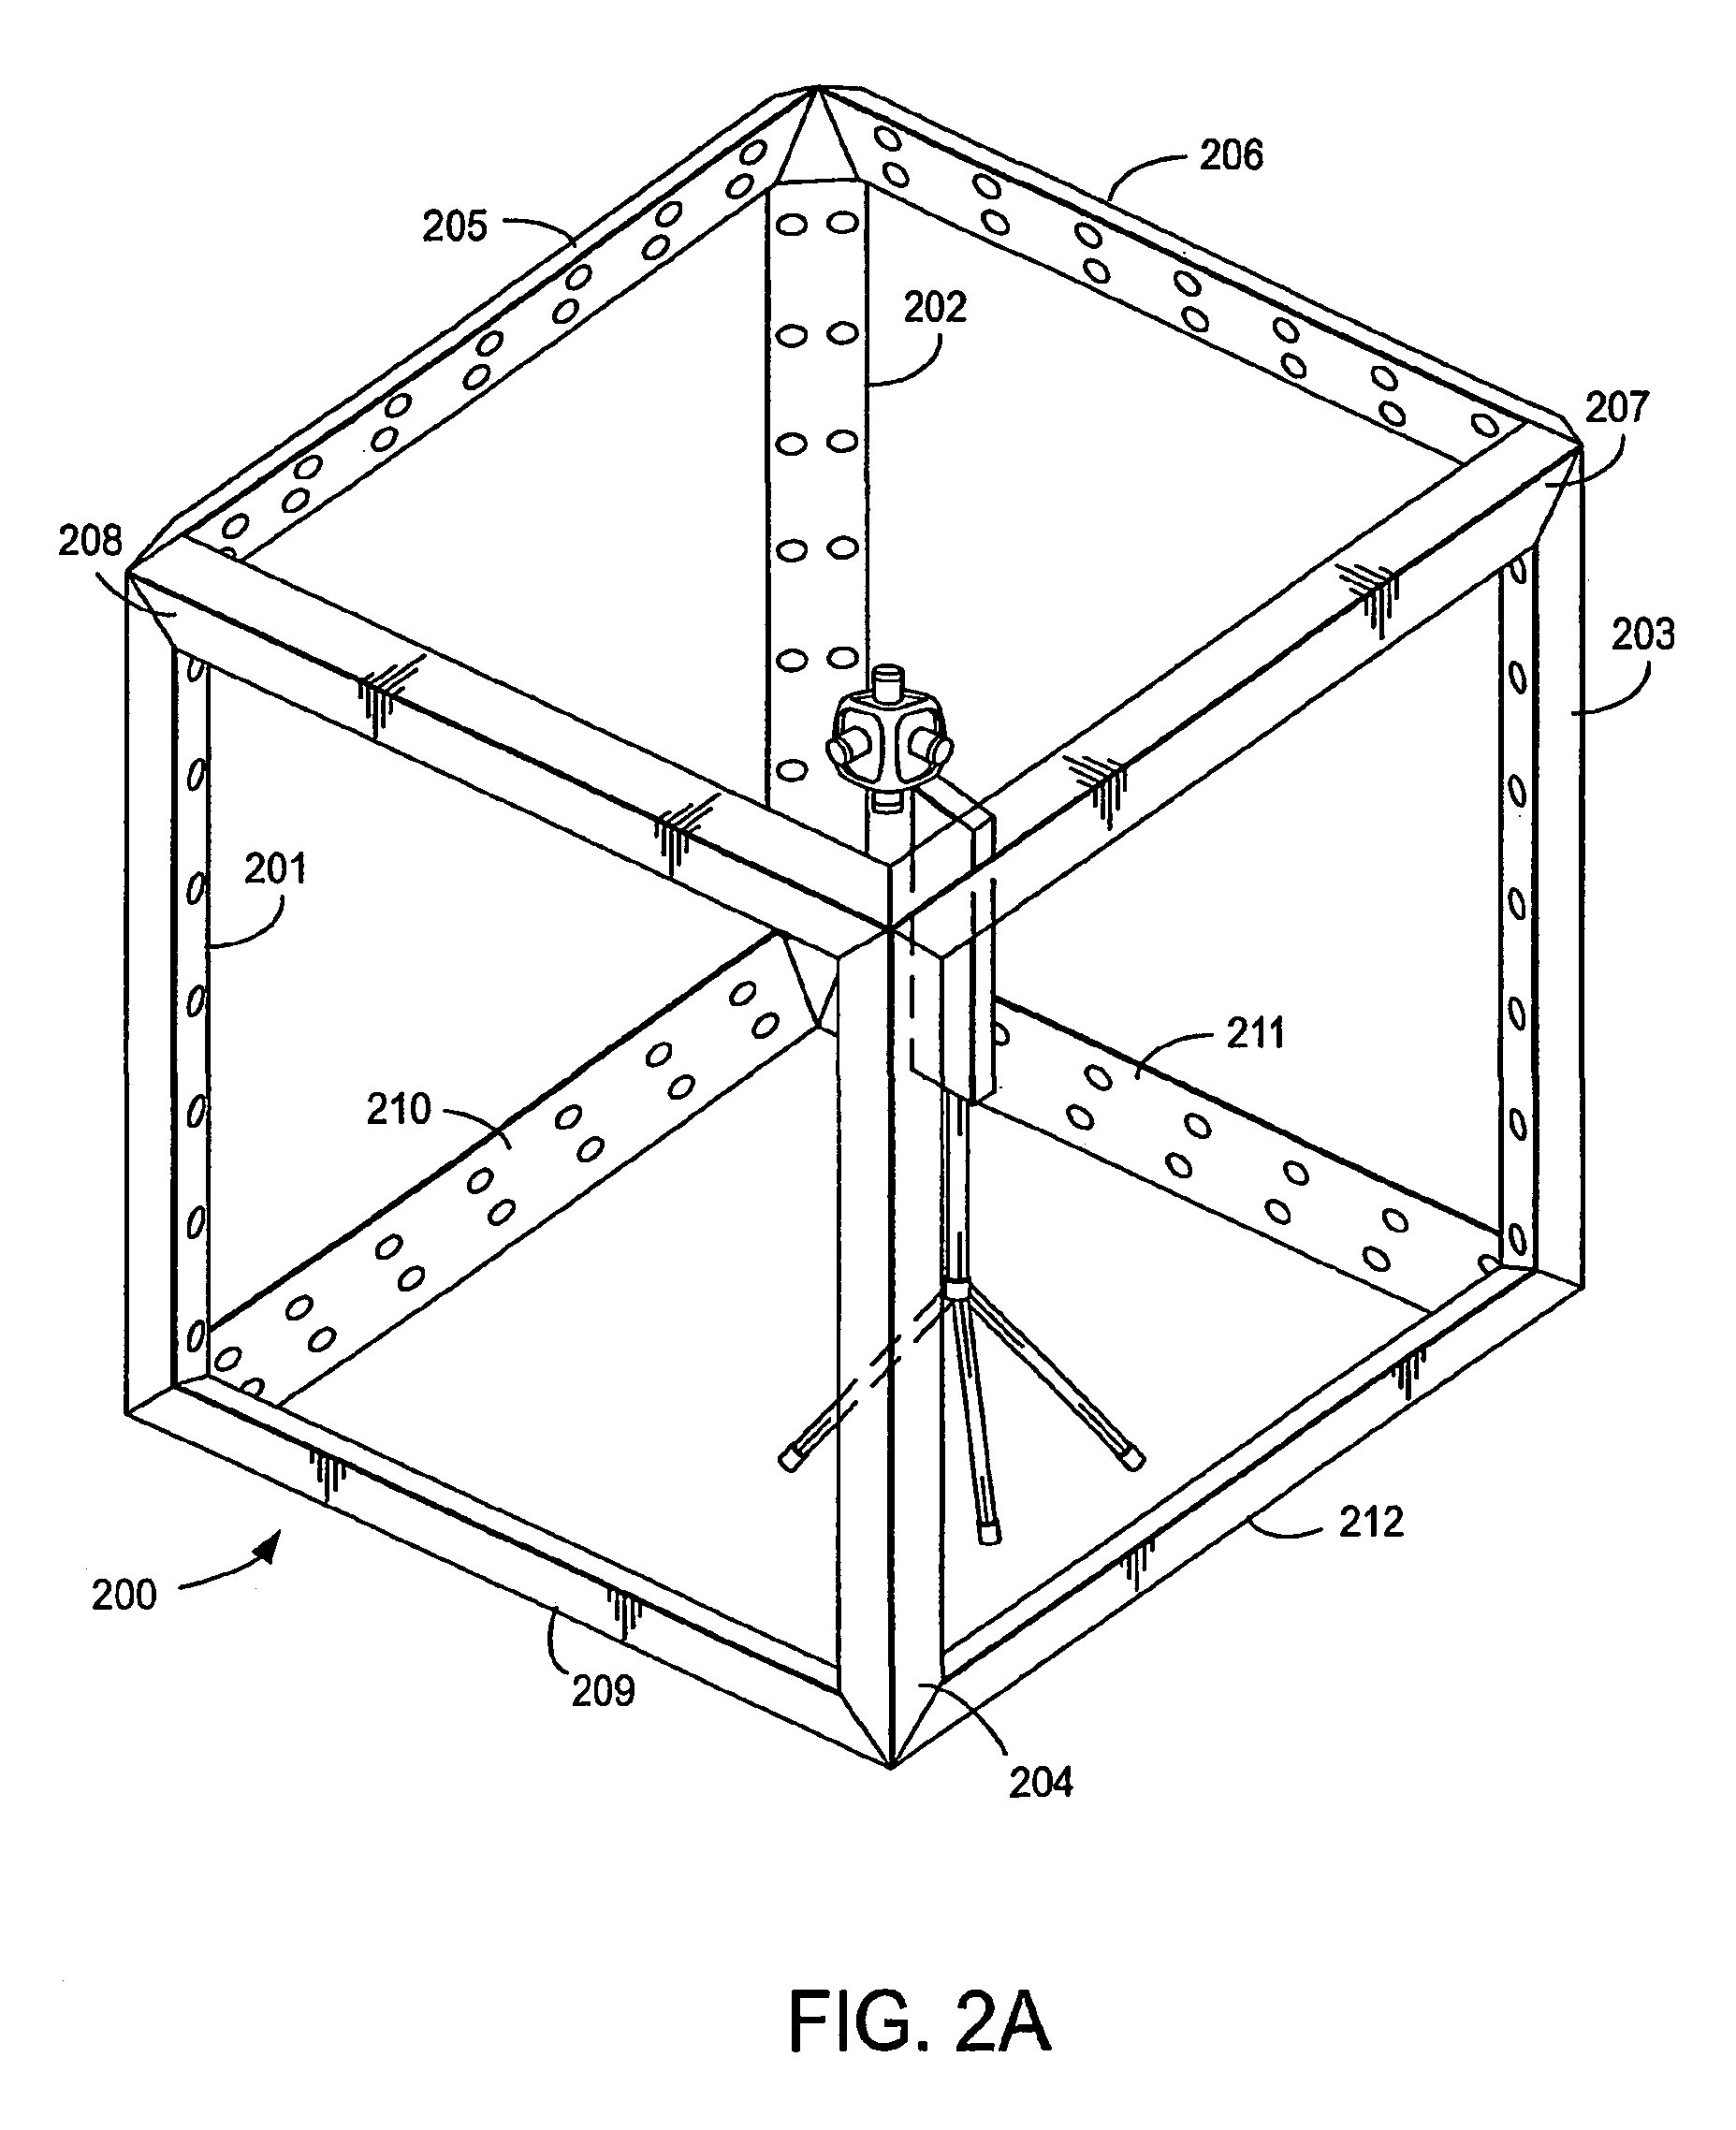 System and method for camera calibration